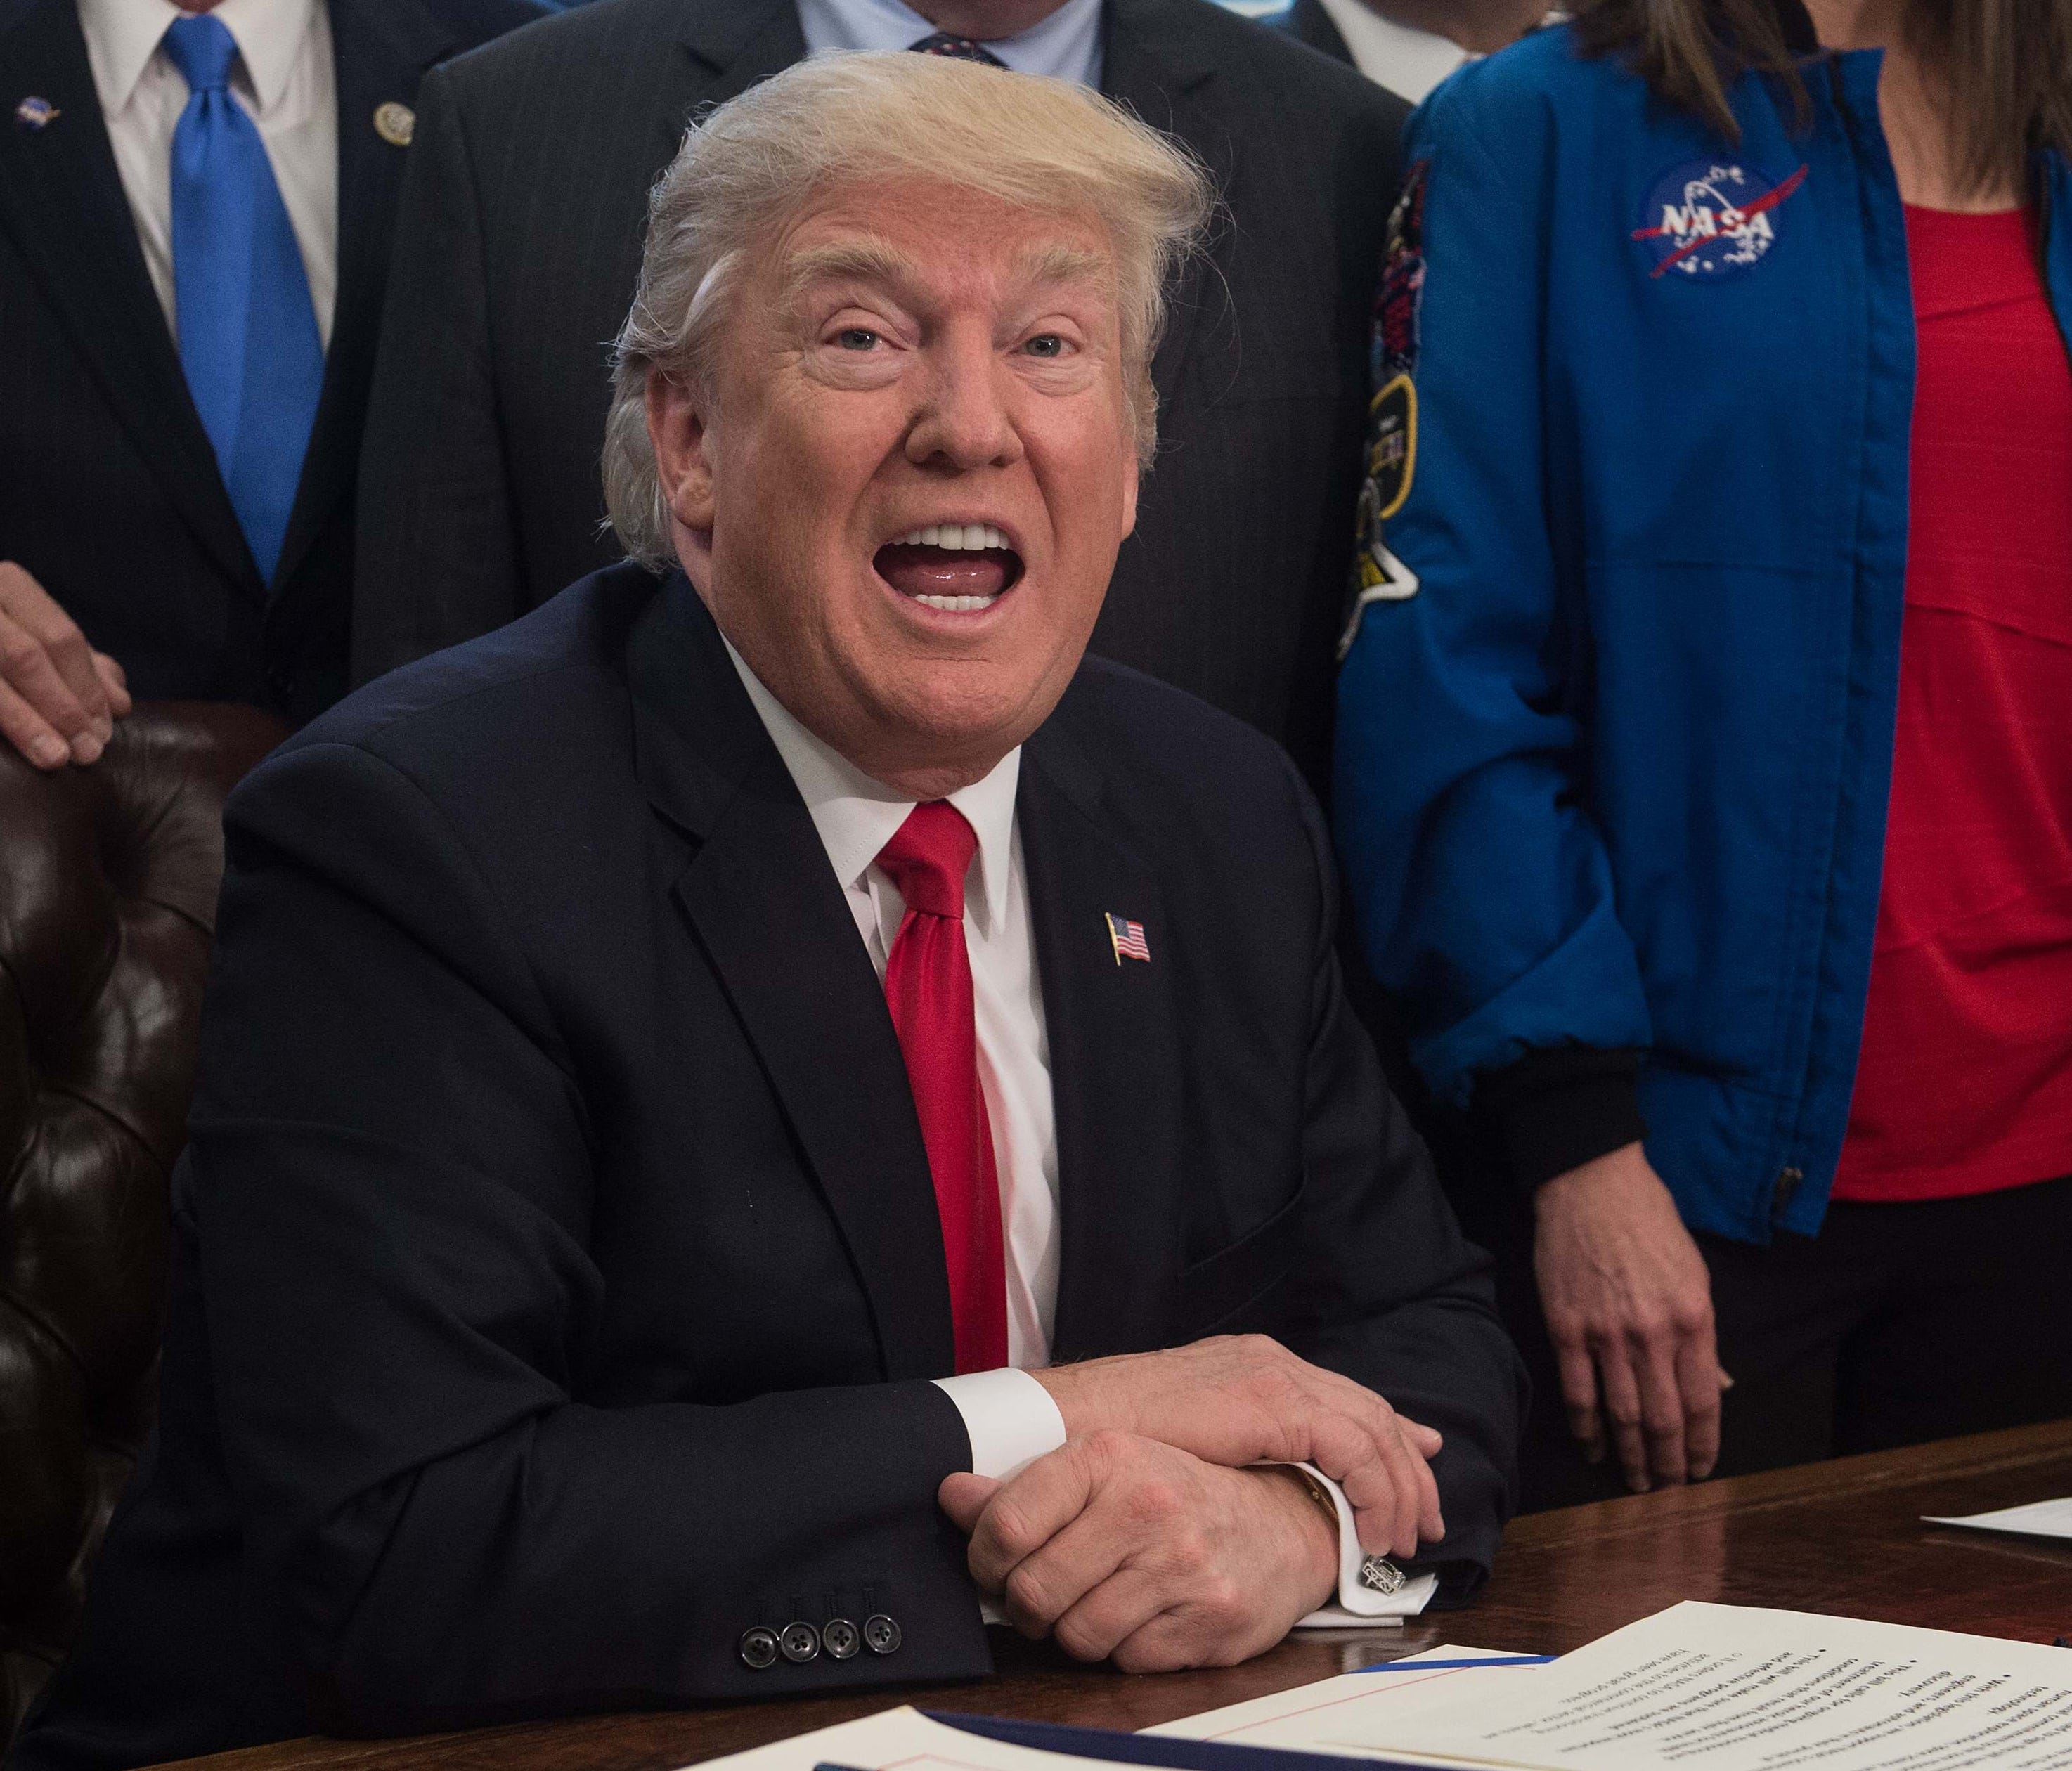 US President Donald Trump speaks before signing a bill increasing funding for NASA in the Oval Office at the White House in Washington, DC, on March 21, 2017. / AFP PHOTO / NICHOLAS KAMMNICHOLAS KAMM/AFP/Getty Images ORIG FILE ID: AFP_MV1XO